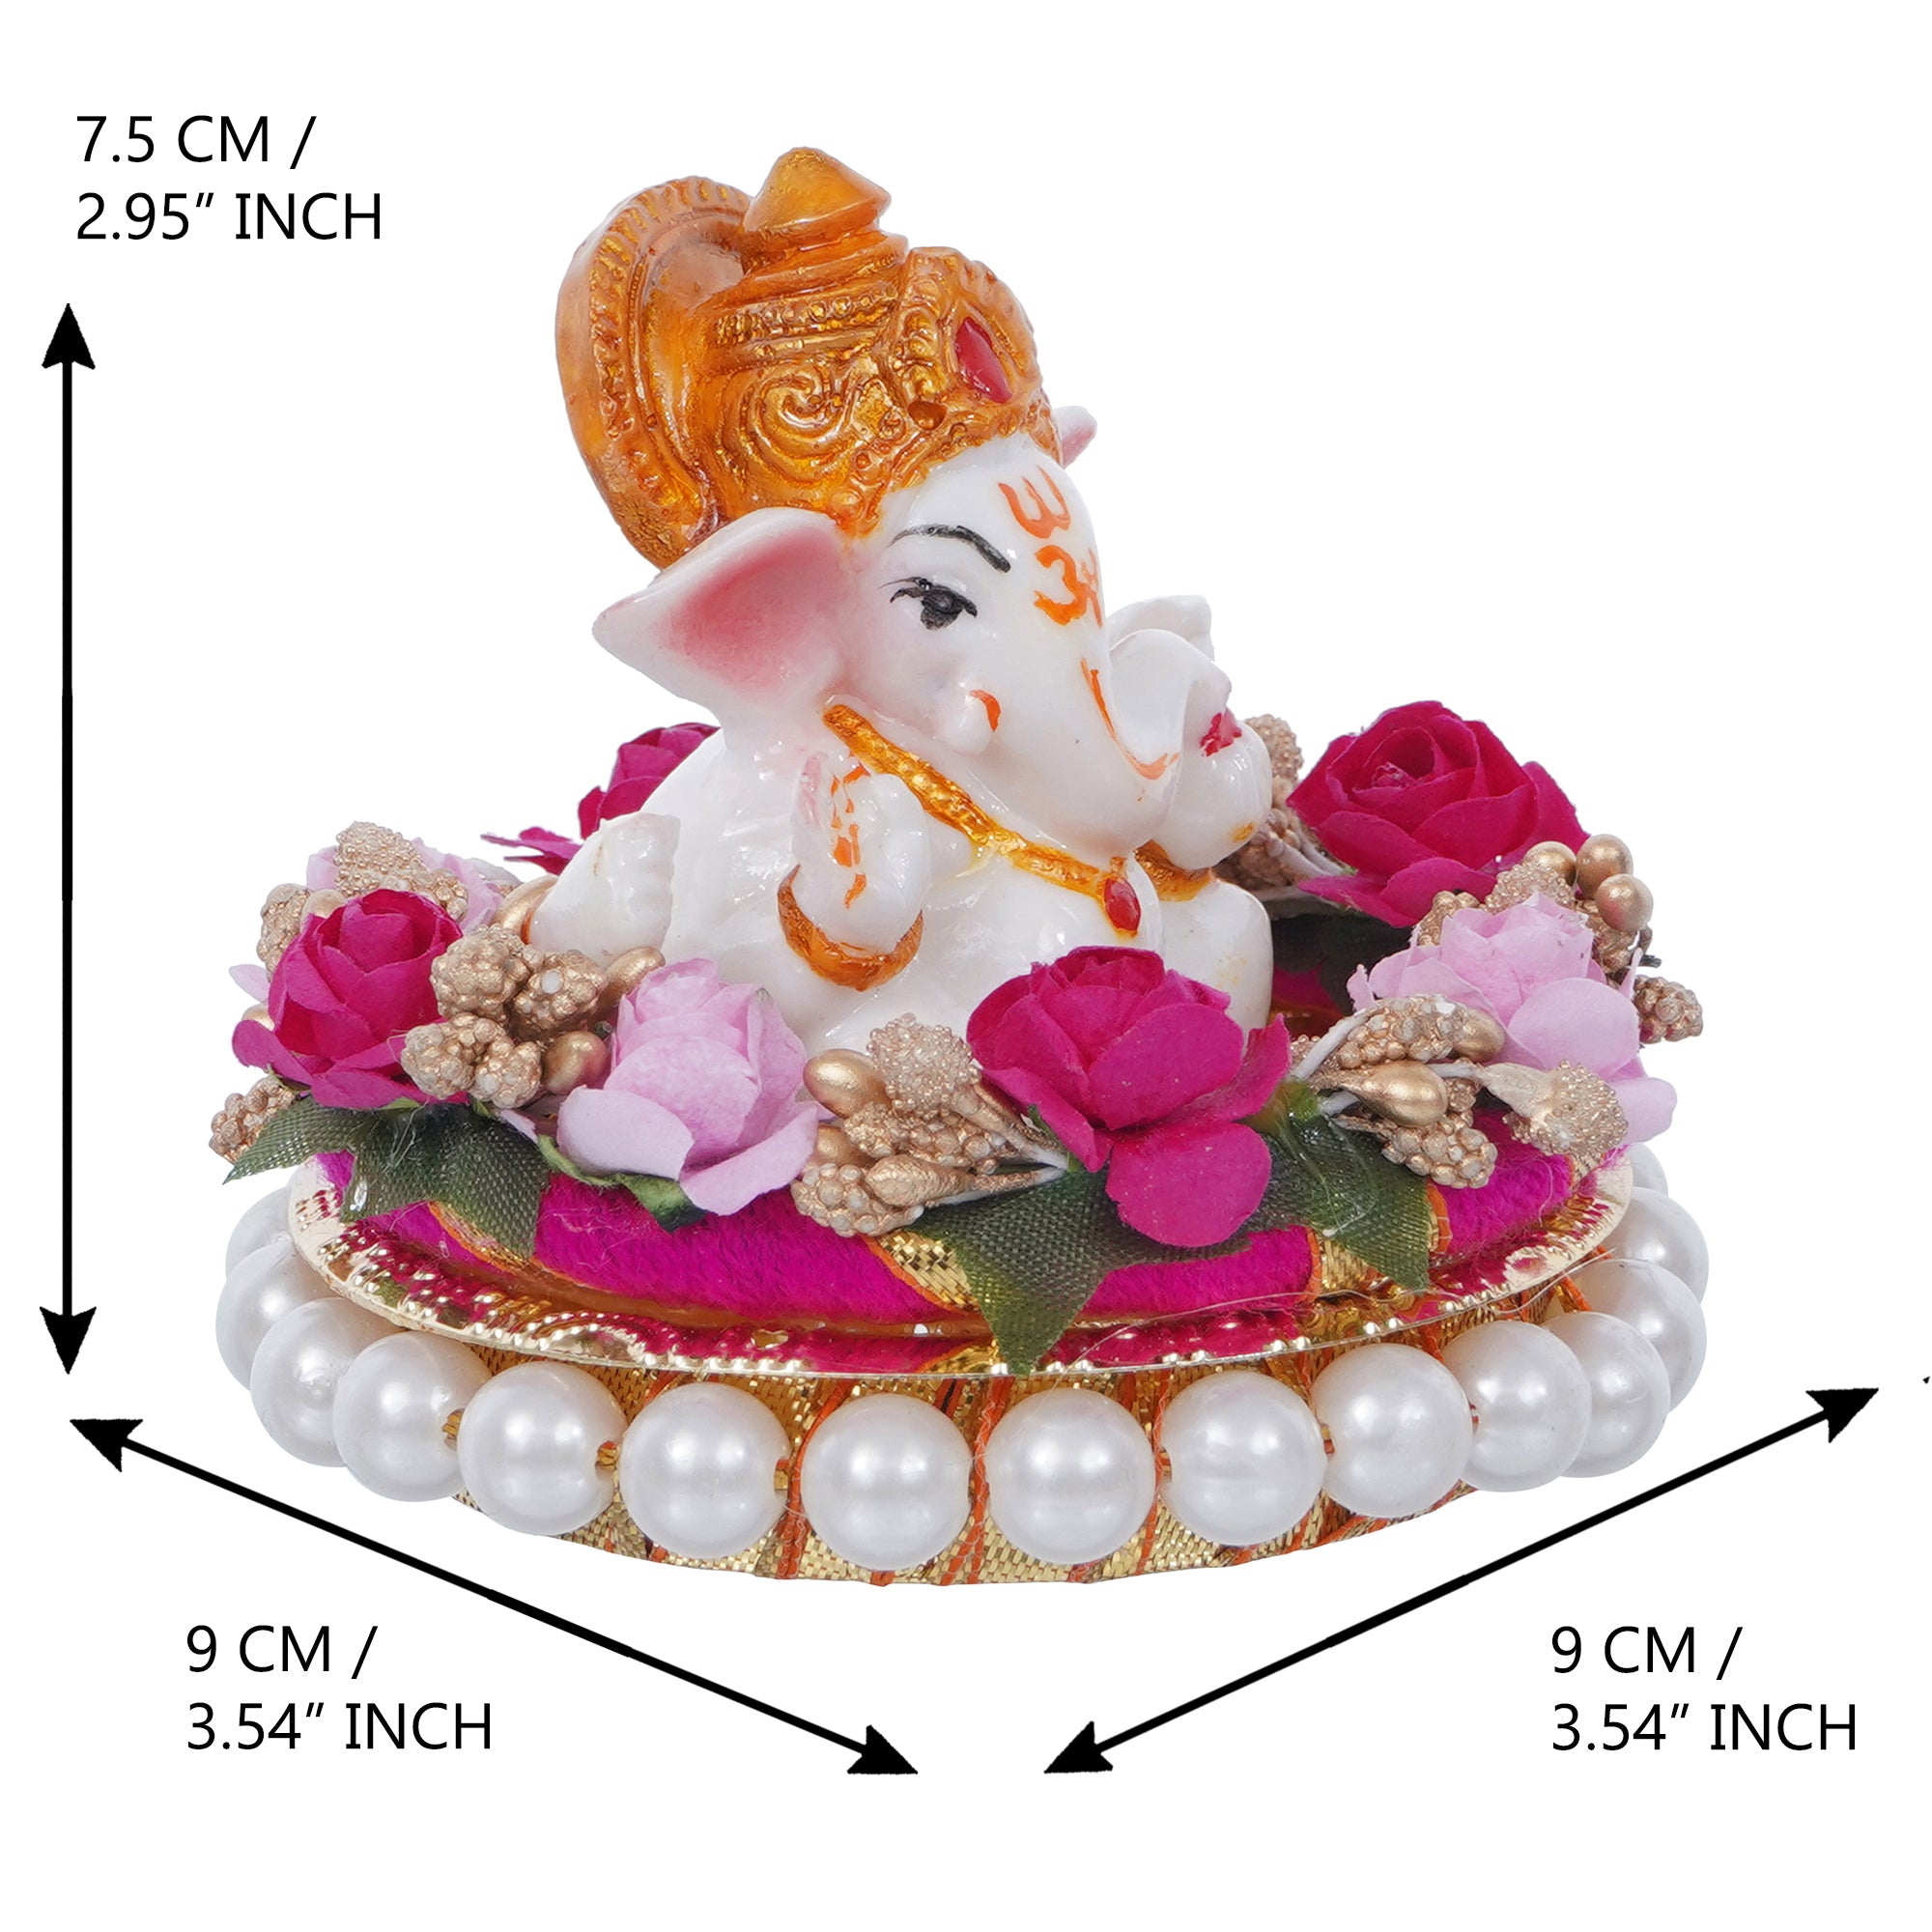 Lord Ganesha Idol On Decorative Handcrafted Colorful Flowers Plate 3